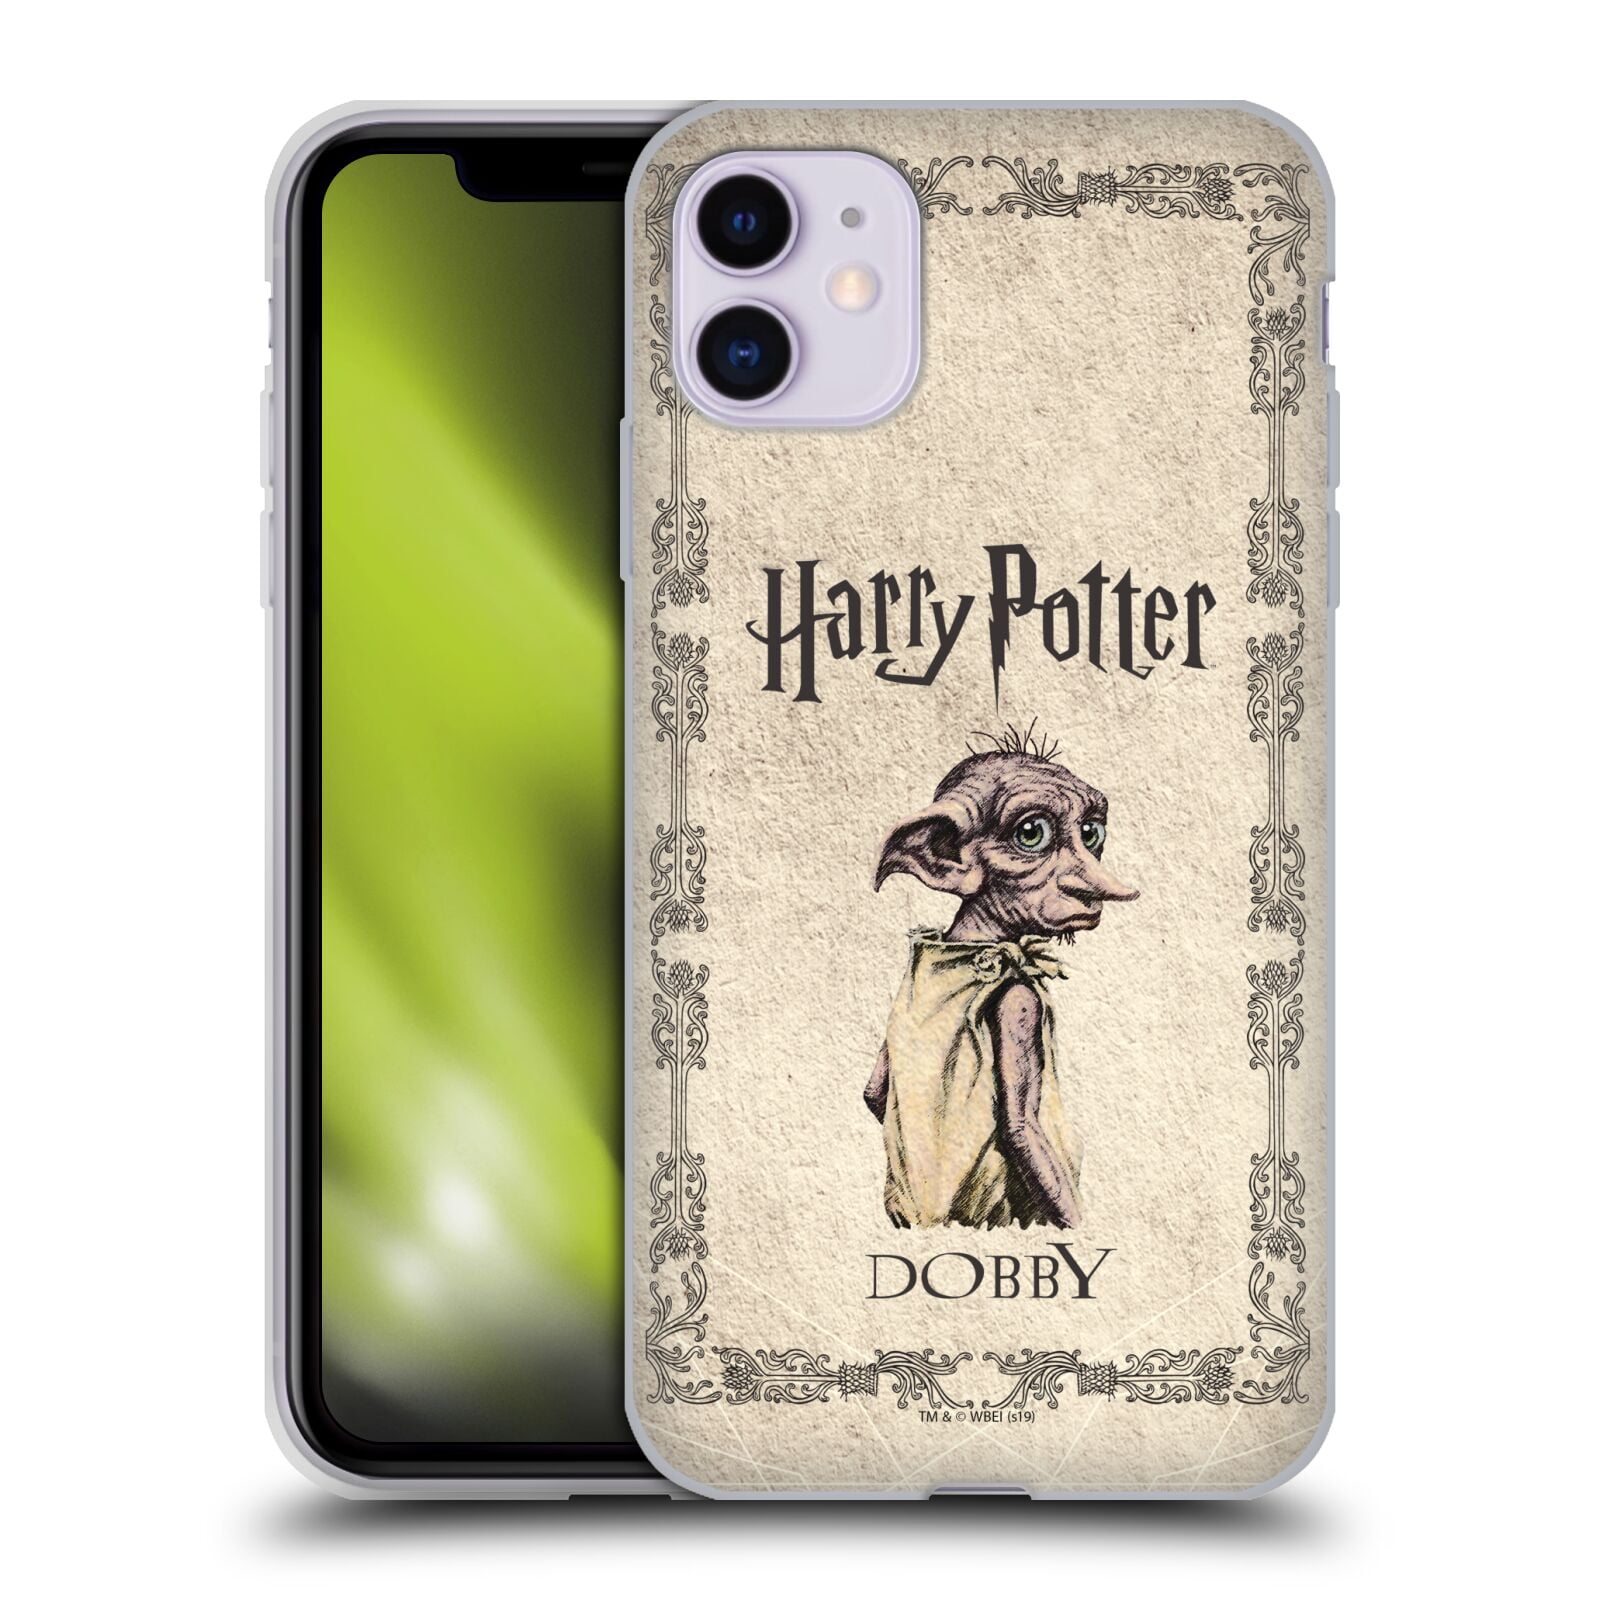 iPhone 8 iPhone SE 2020 Head Case Designs Officially Licensed Harry Potter Dobby House Elf Creature Chamber Of Secrets II Hard Back Case Compatible With Apple iPhone 7